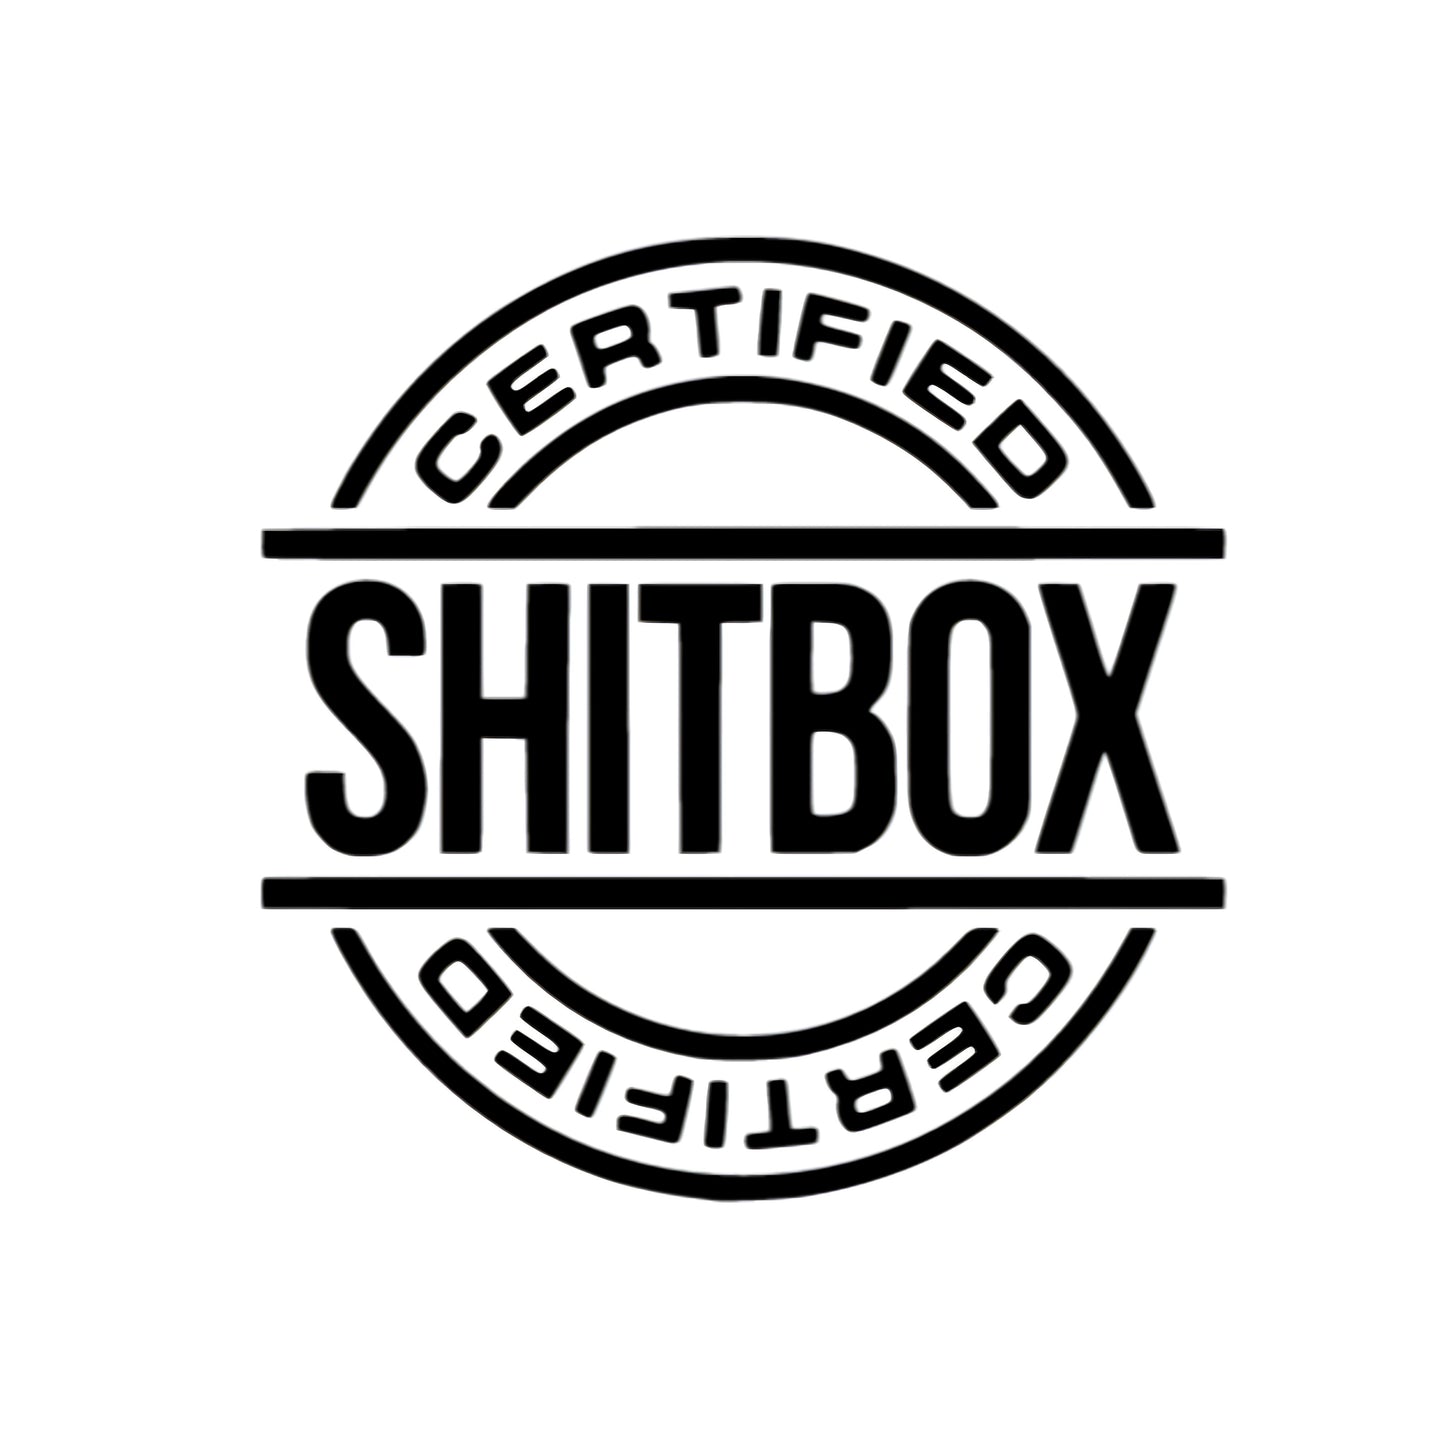 Certified Shitbox Decal - Car Decals JDM